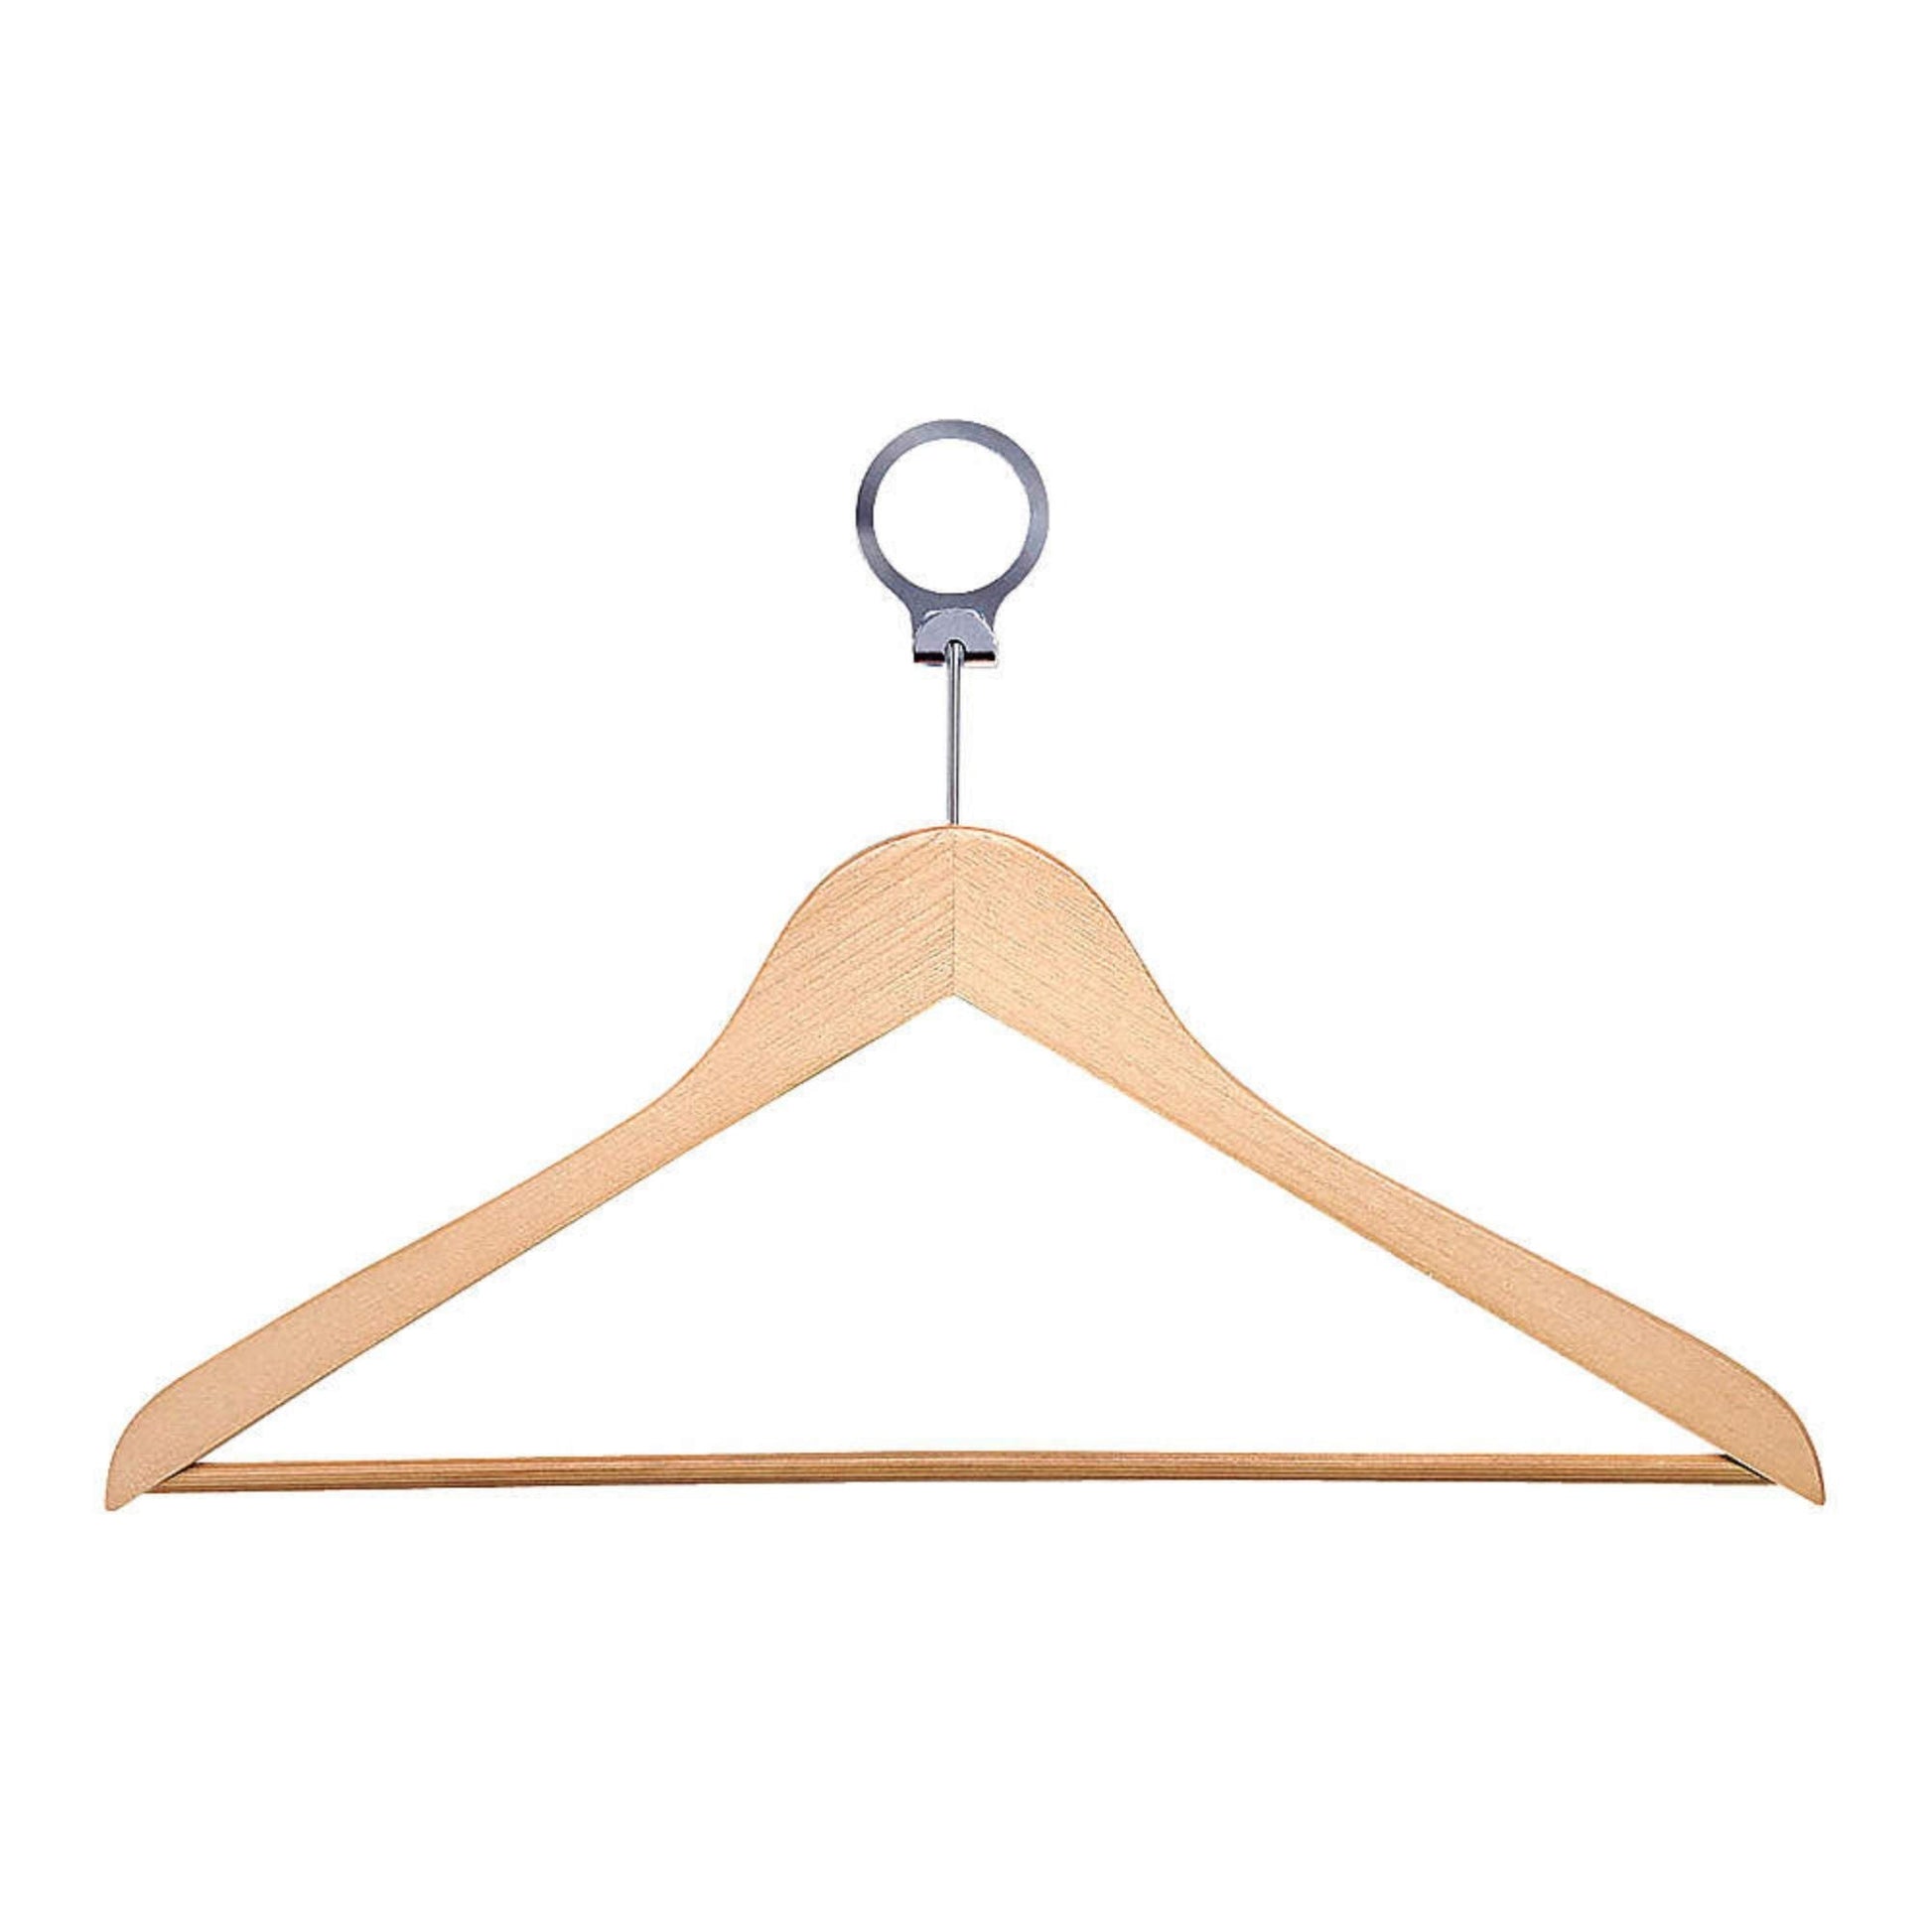 Solid Natural Wood Hangers - round handle